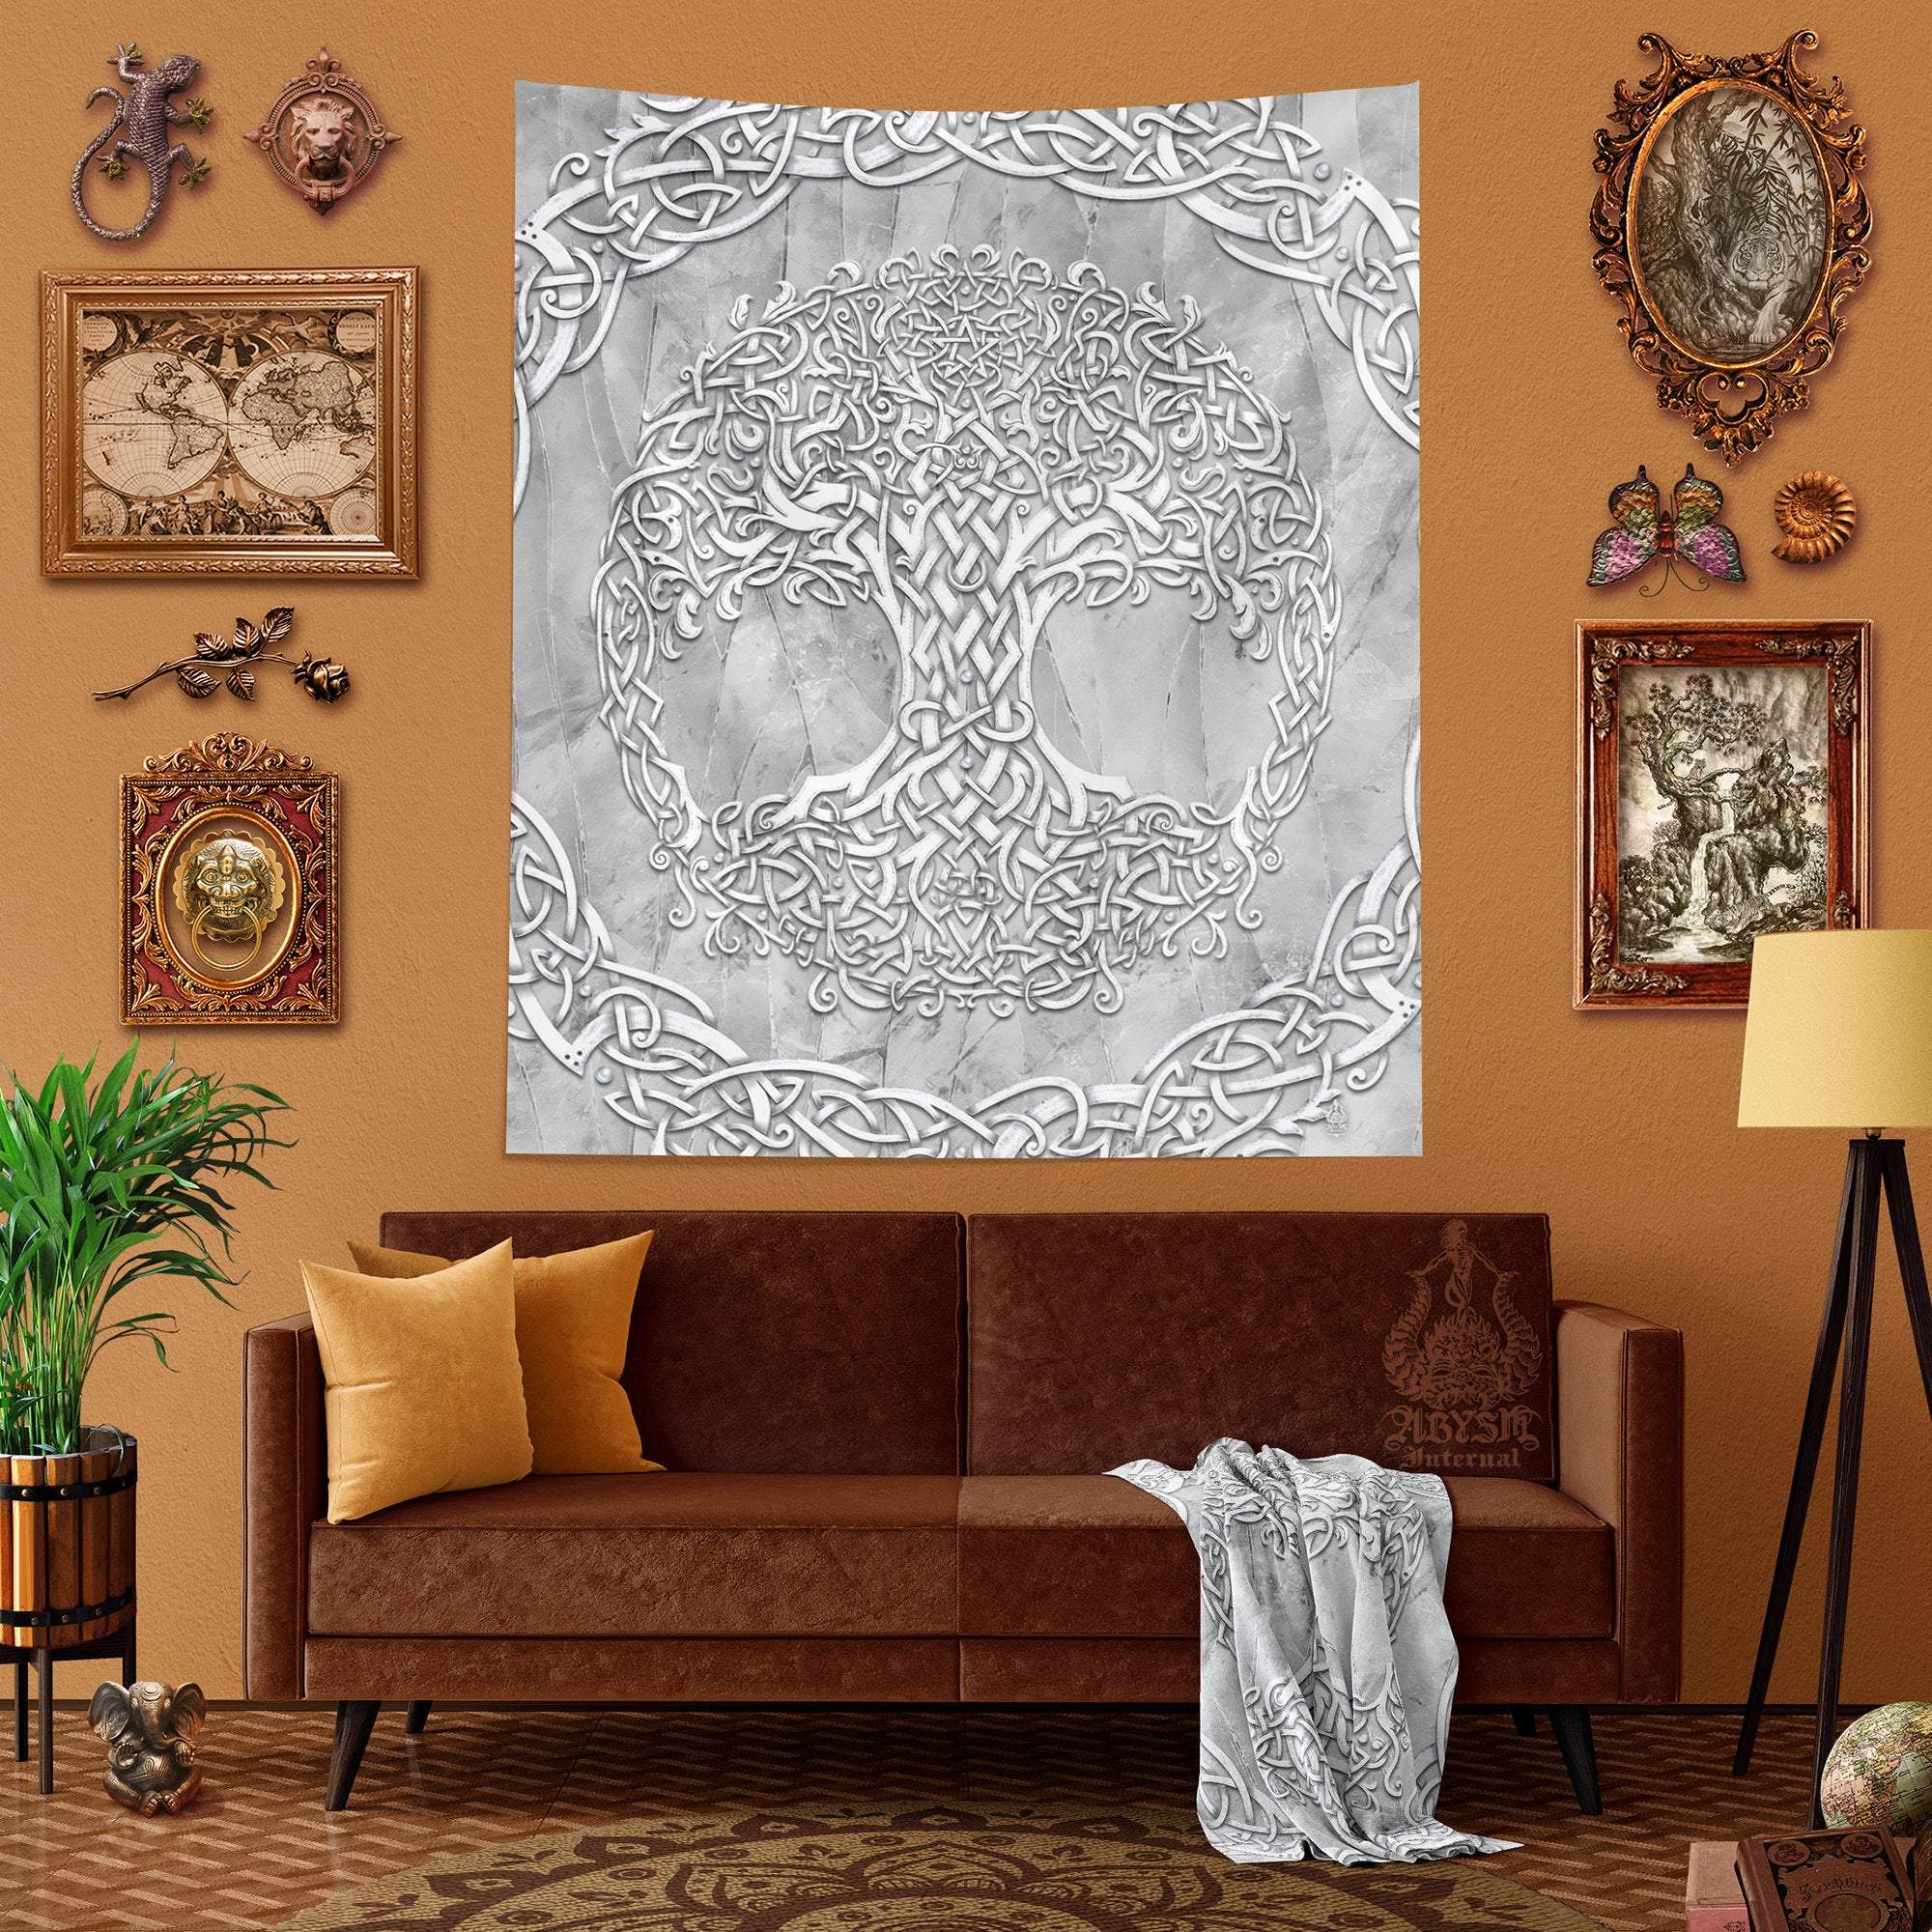 Tree of Life Tapestry, Celtic Wall Hanging, Pagan and Boho and Indie Home Decor, Art Print, Eclectic and Funky - Stone - Abysm Internal